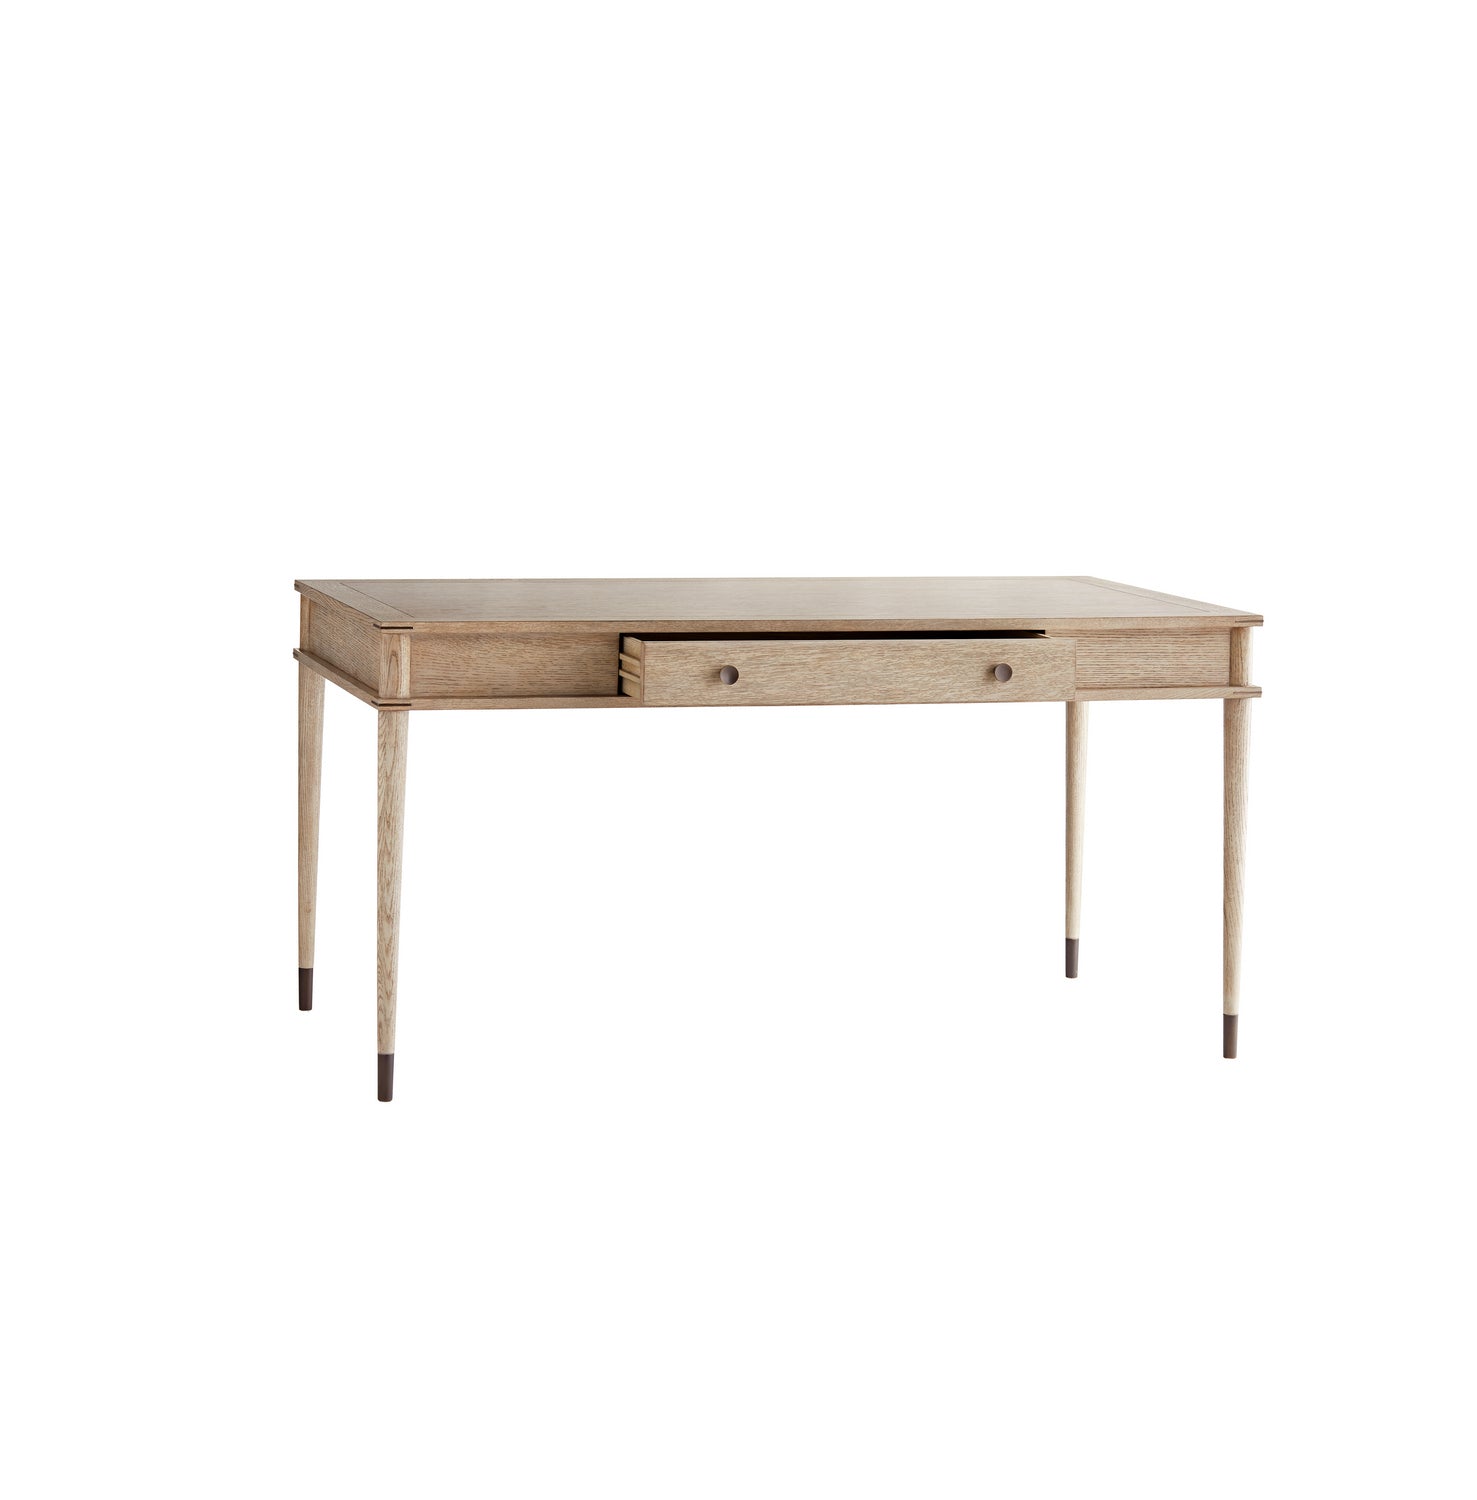 Desk from the Jobe collection in Smoke finish